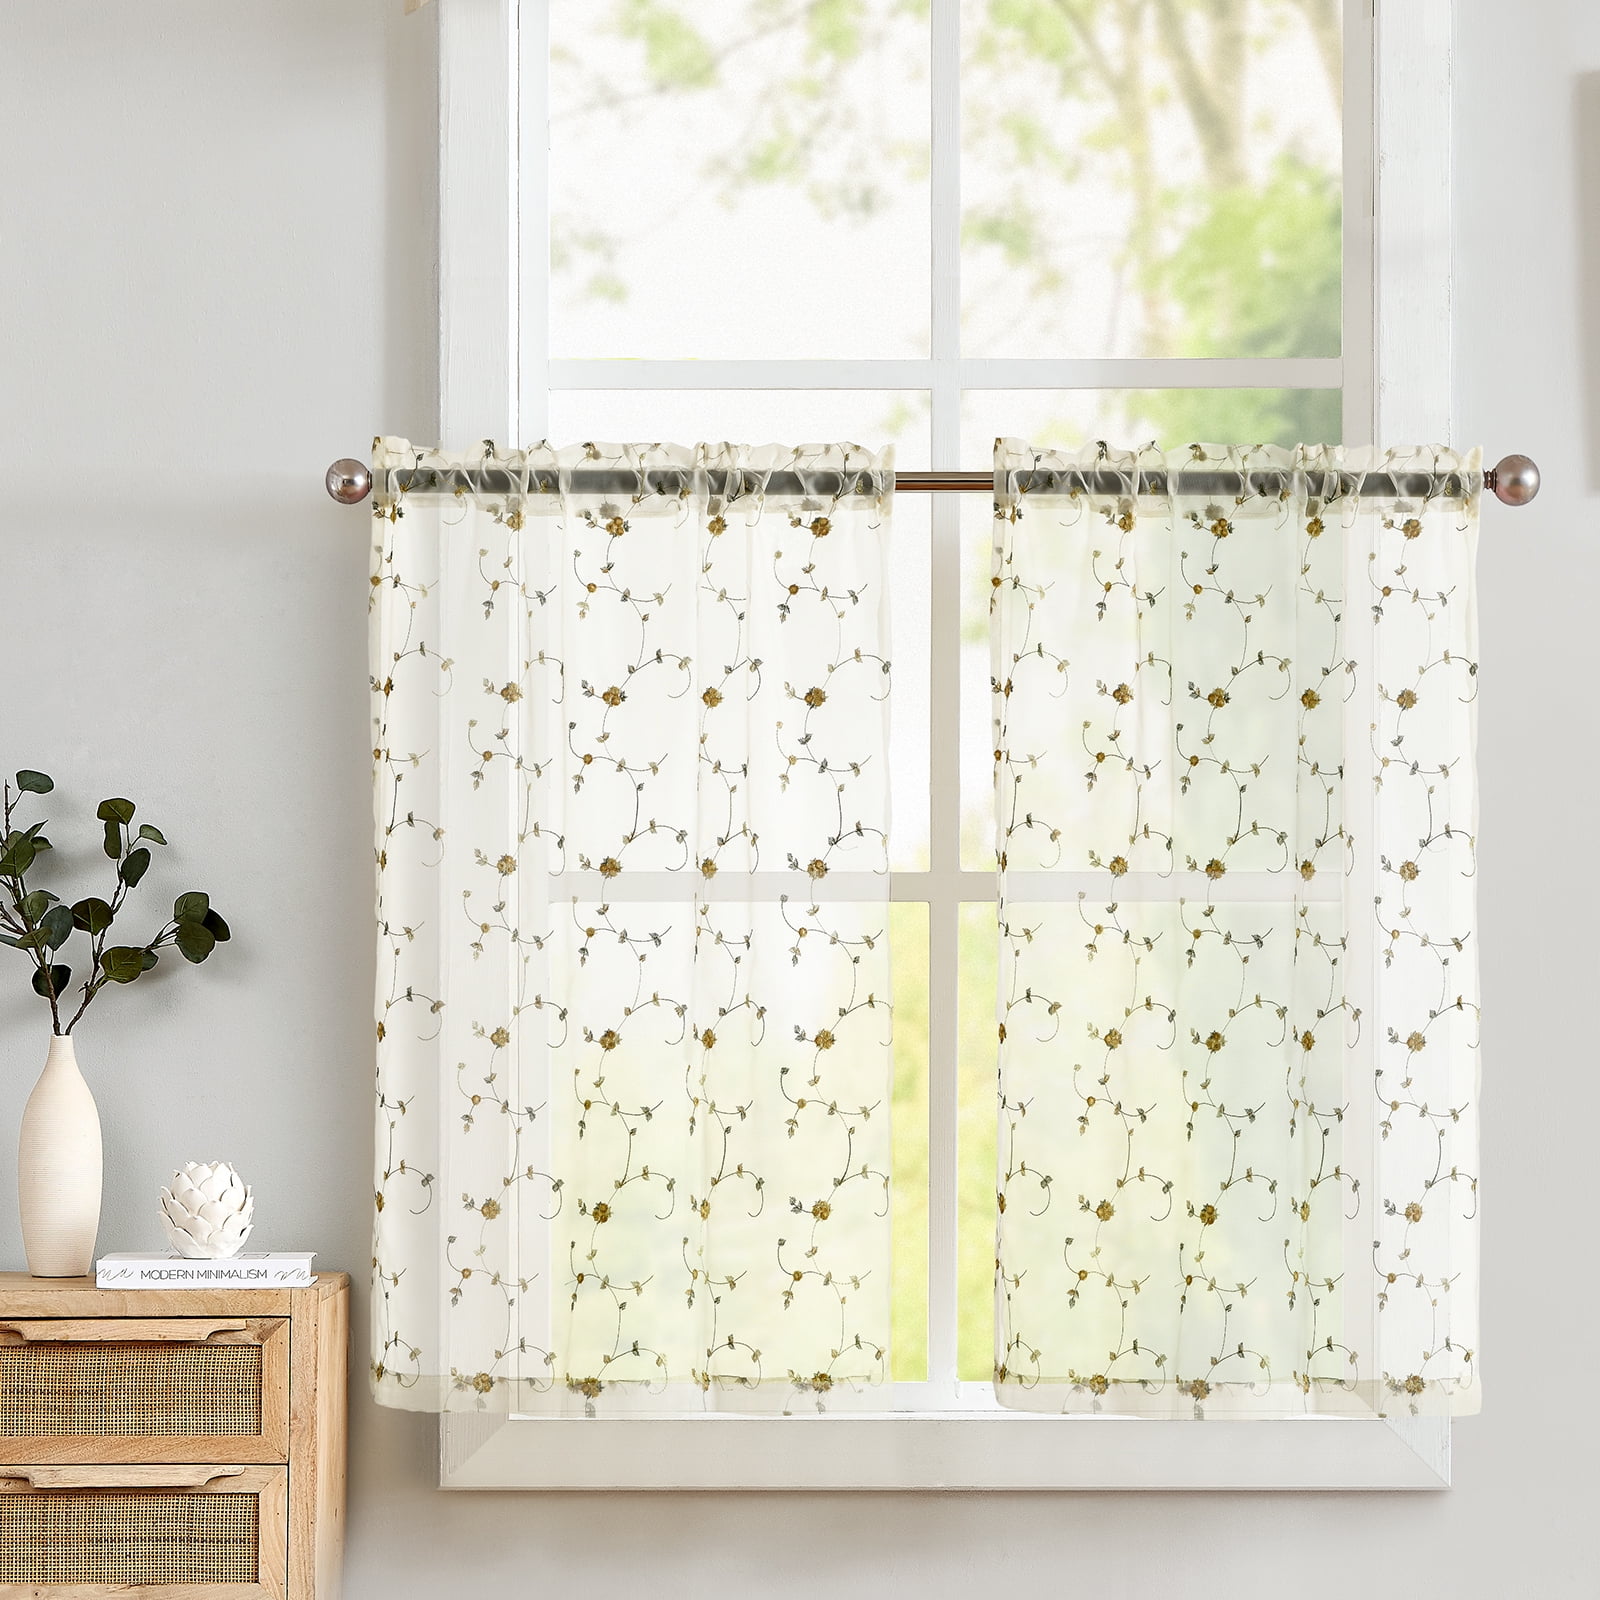 Curtainking Kitchen Curtains 24 Inch Floral Embroidered Sheer Tier